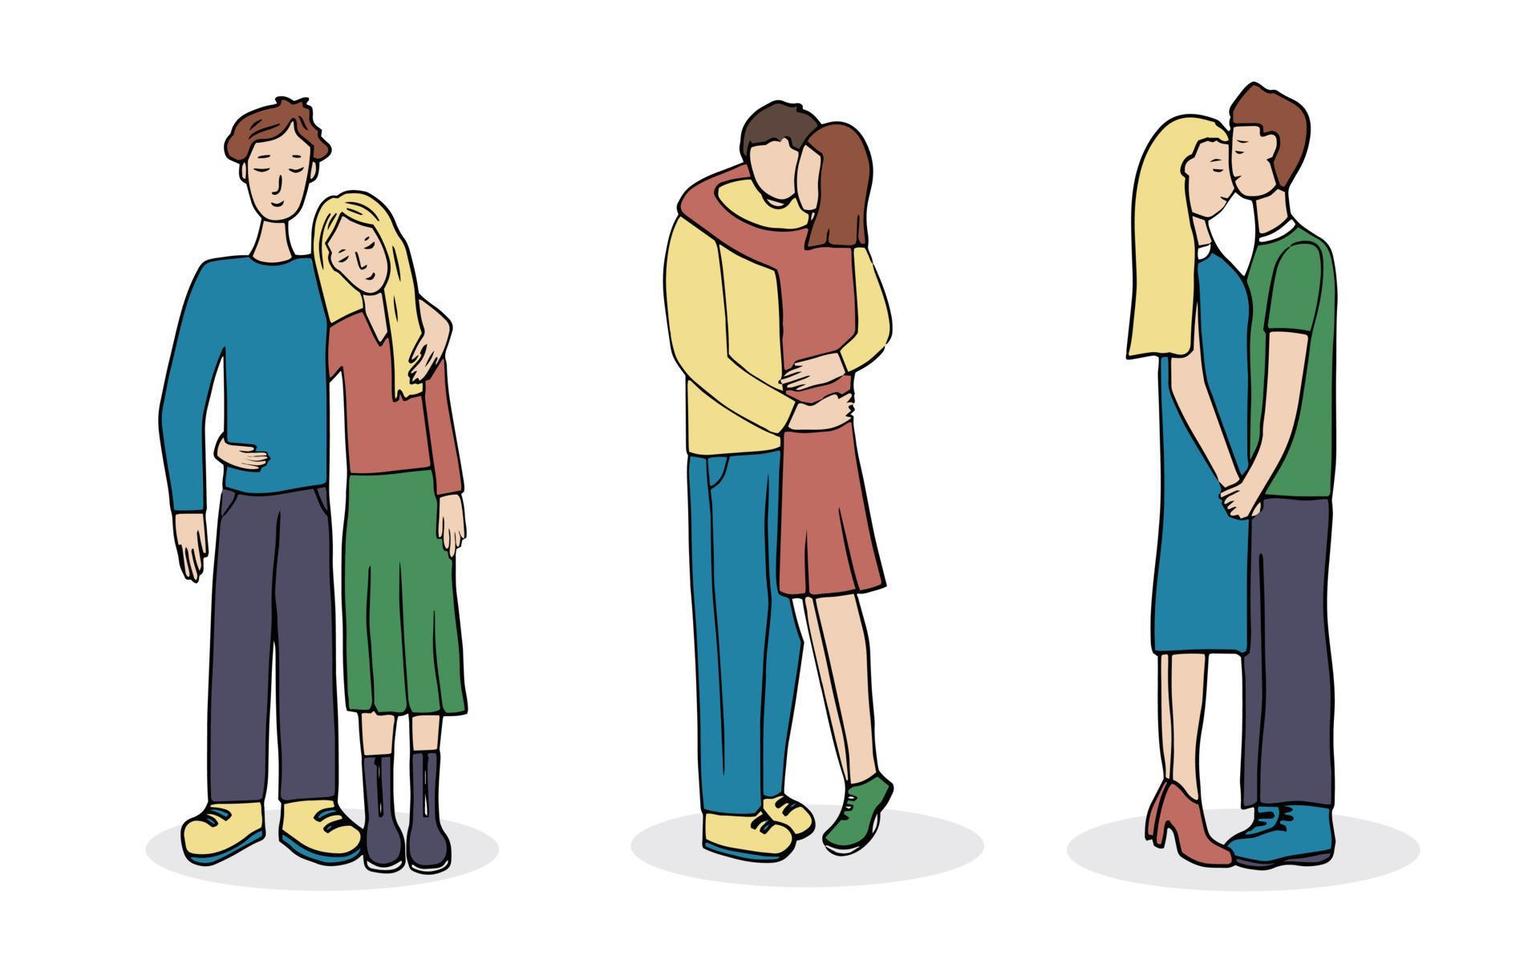 Romantic couples. A set of cute vector characters. Young guy and girl in love and hugging. A scene of tenderness and display of feelings